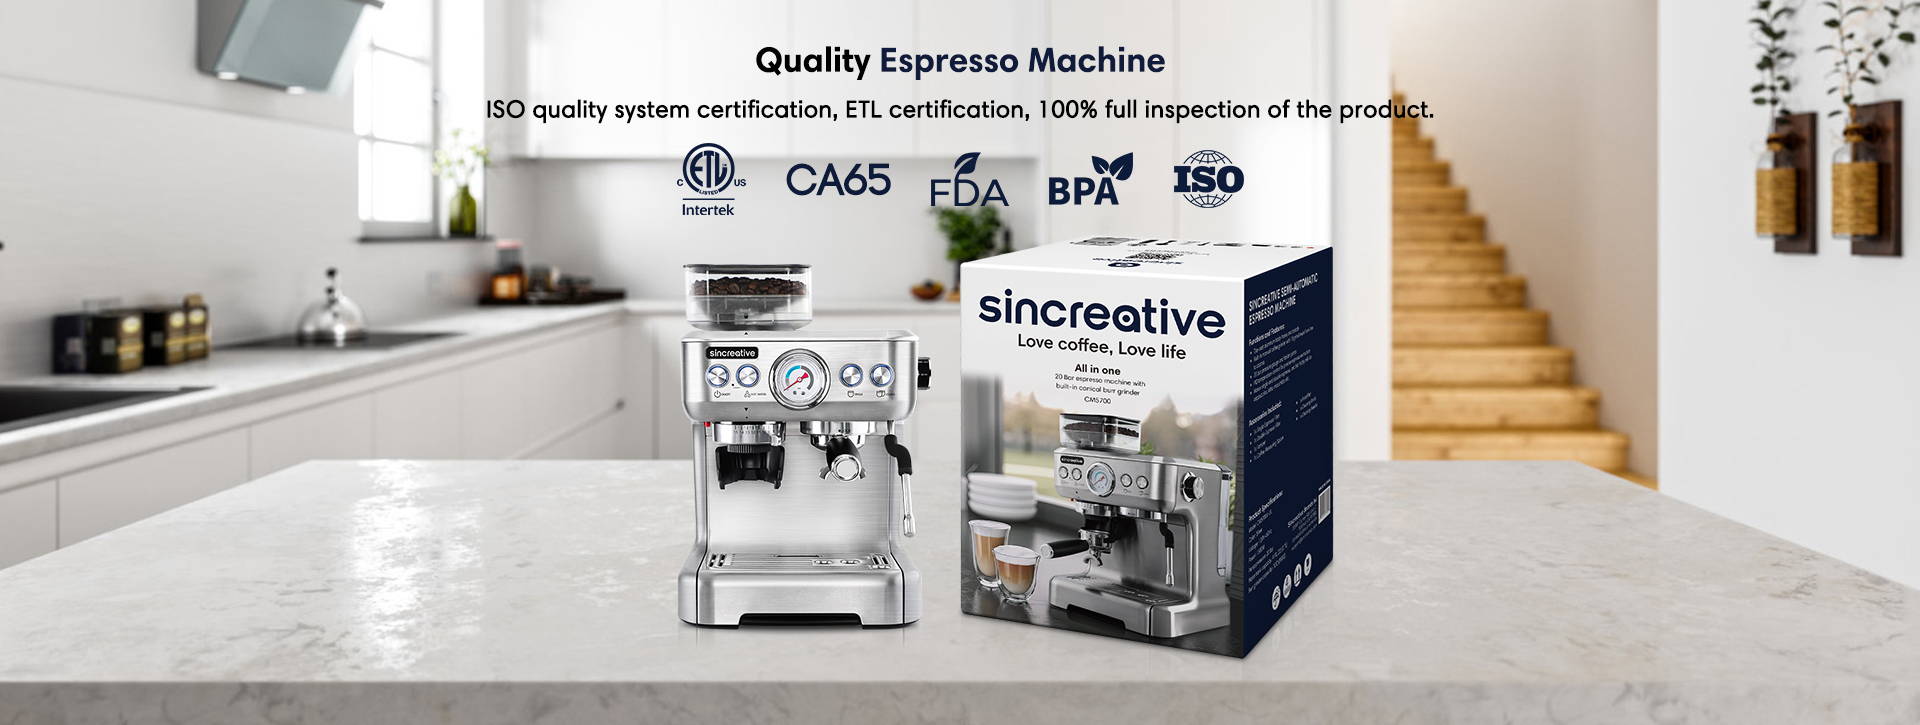 quality espresso machine for home use at a affordable price